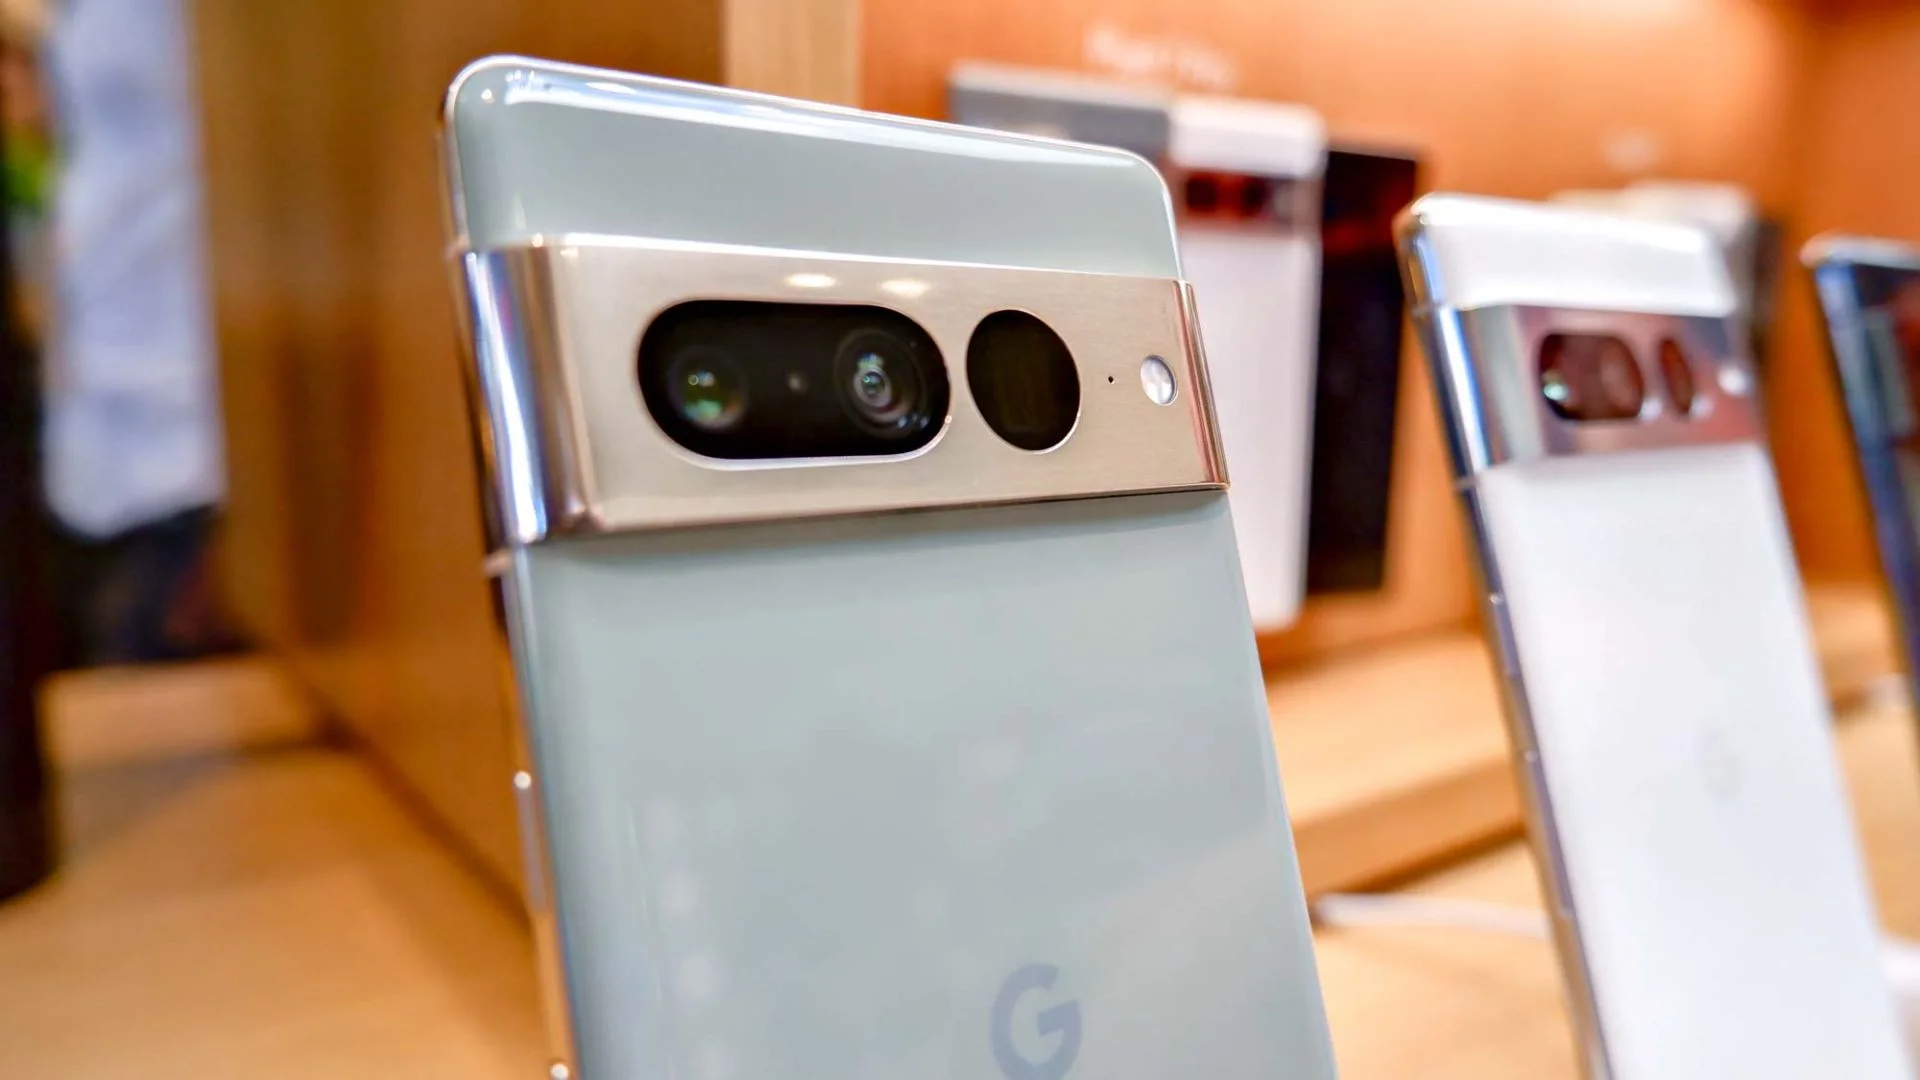 The digital zoom capabilities of the Google Pixel 7 Pro camera showed in new pictures